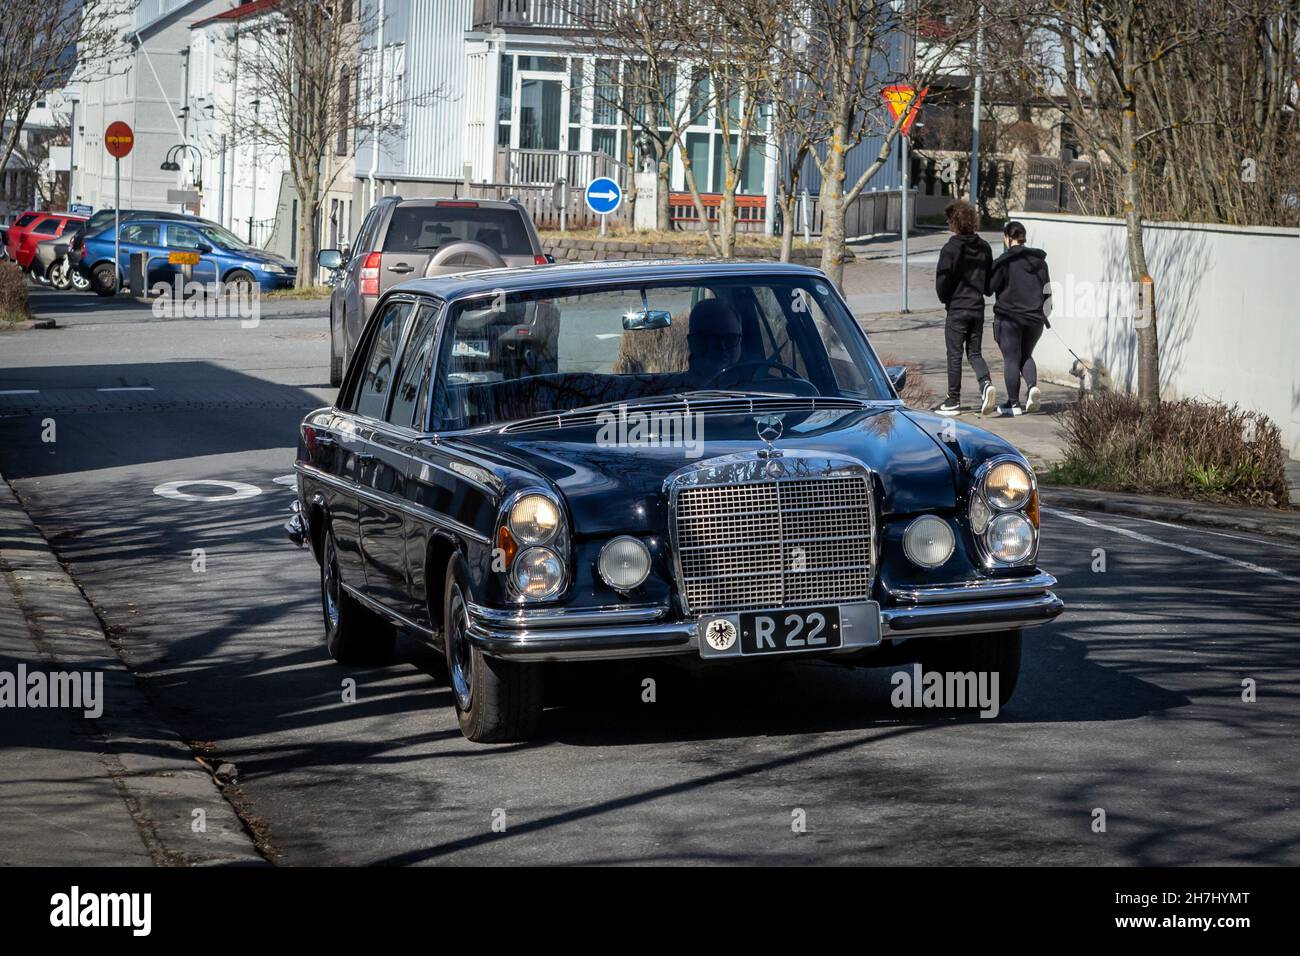 Reykjavik, Iceland - June 12 2021: A black Mercedes W108/109 driving on the street in Reykjavik downtown. People walking by, sunny day. Stock Photo